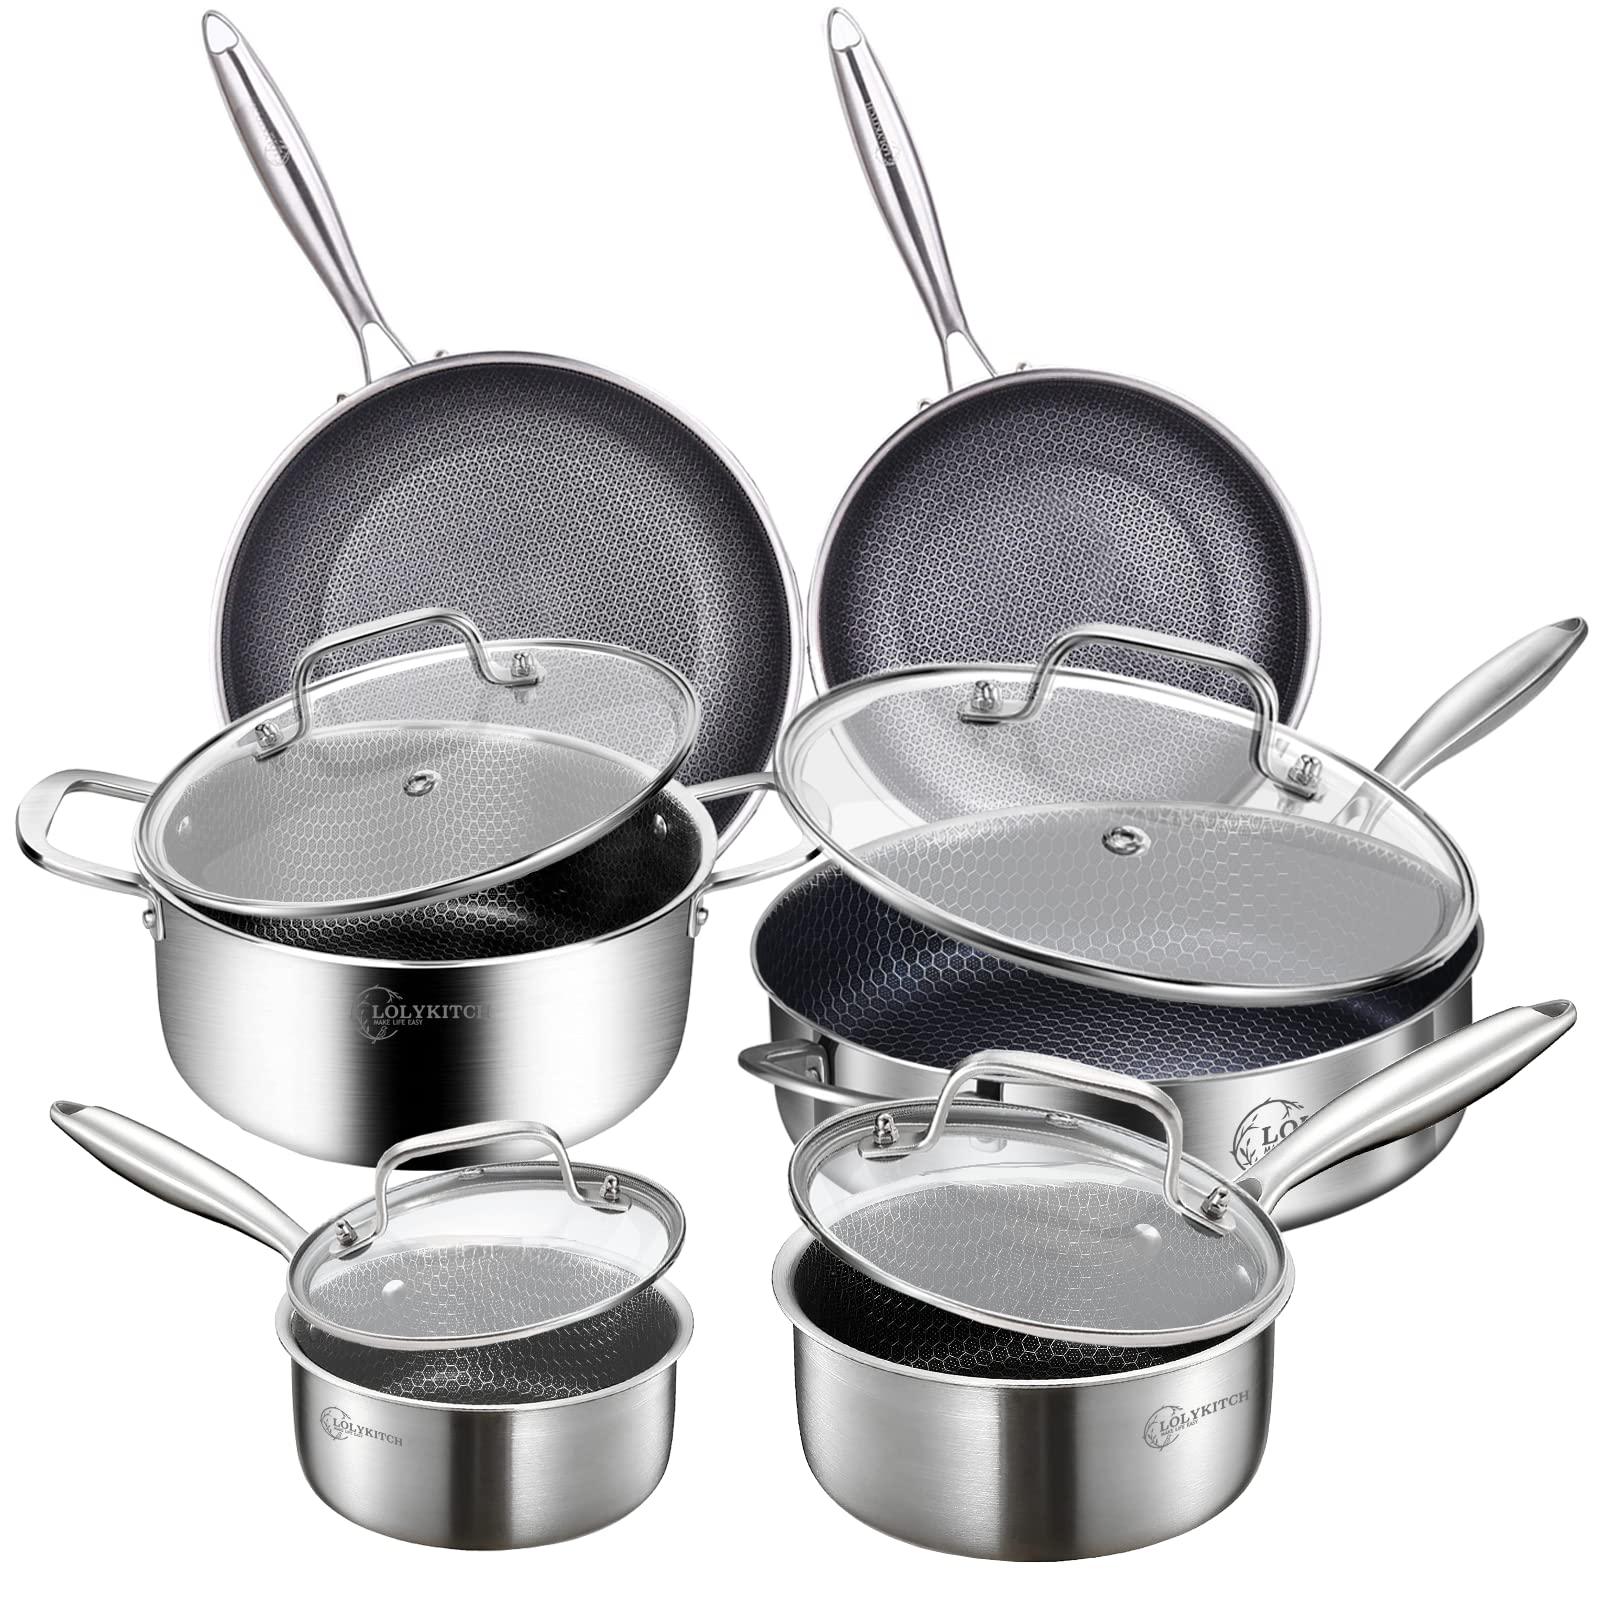 LOLYKITcH lolykitch tri-ply stainless steel cookware set frying